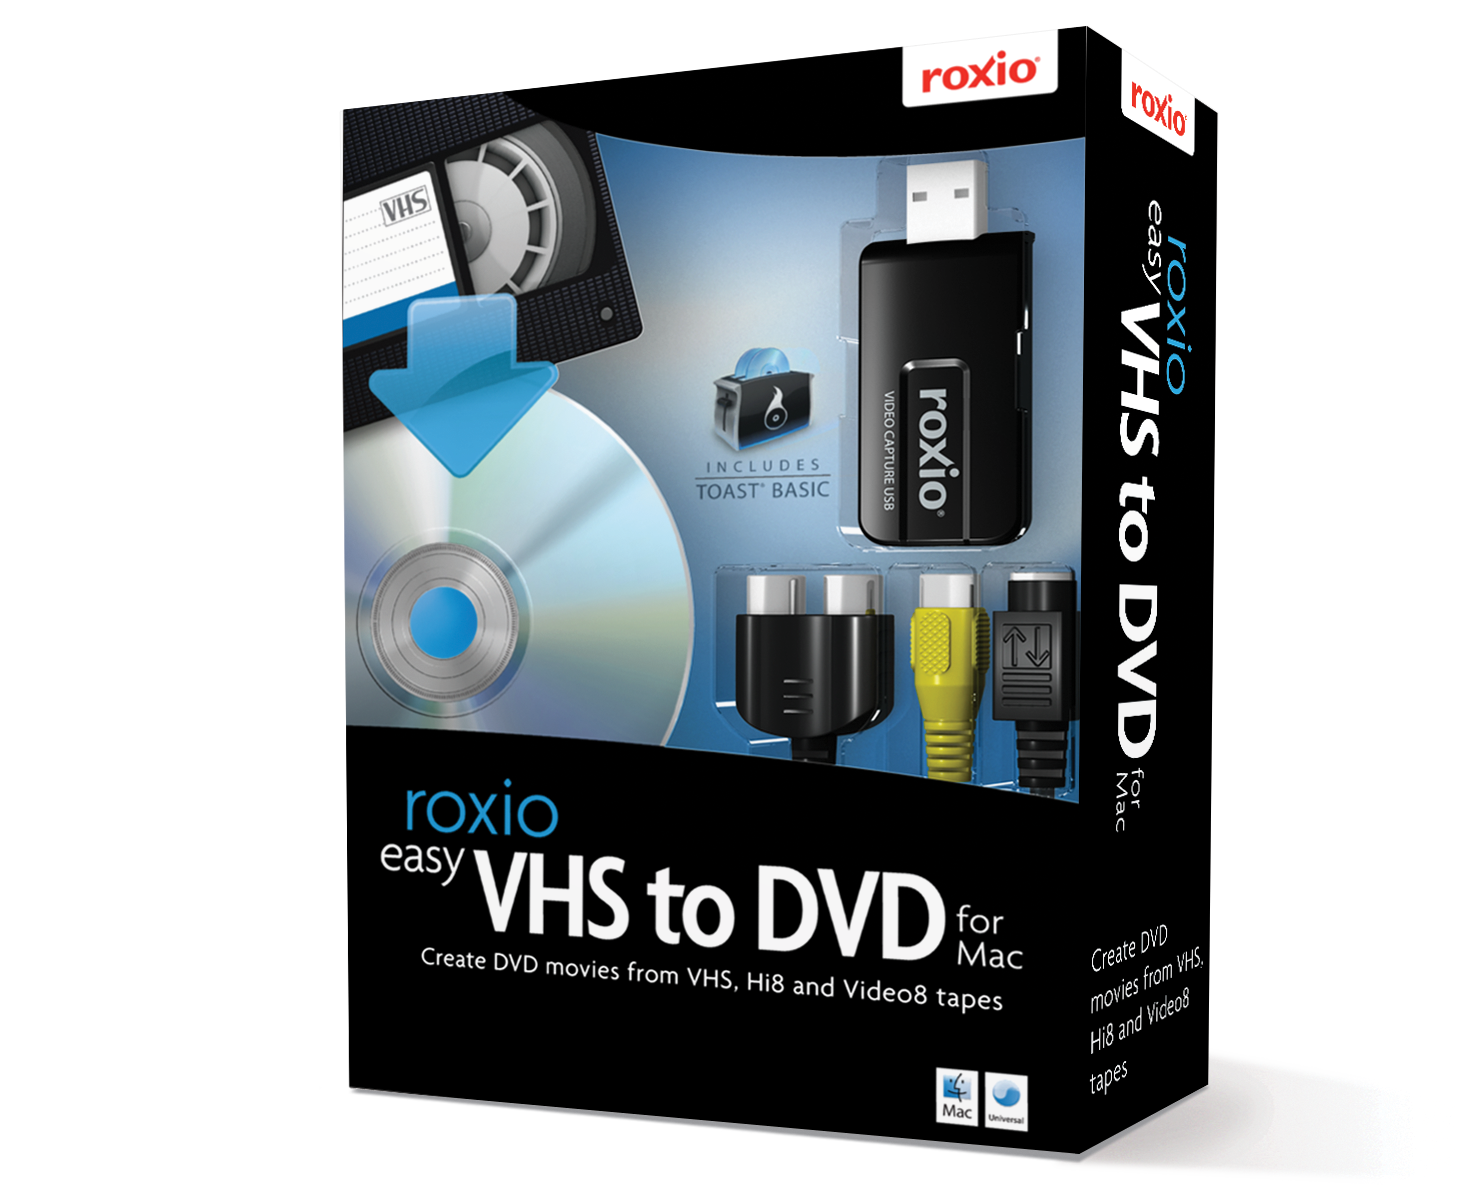 download roxio easy vhs to dvd for mac software